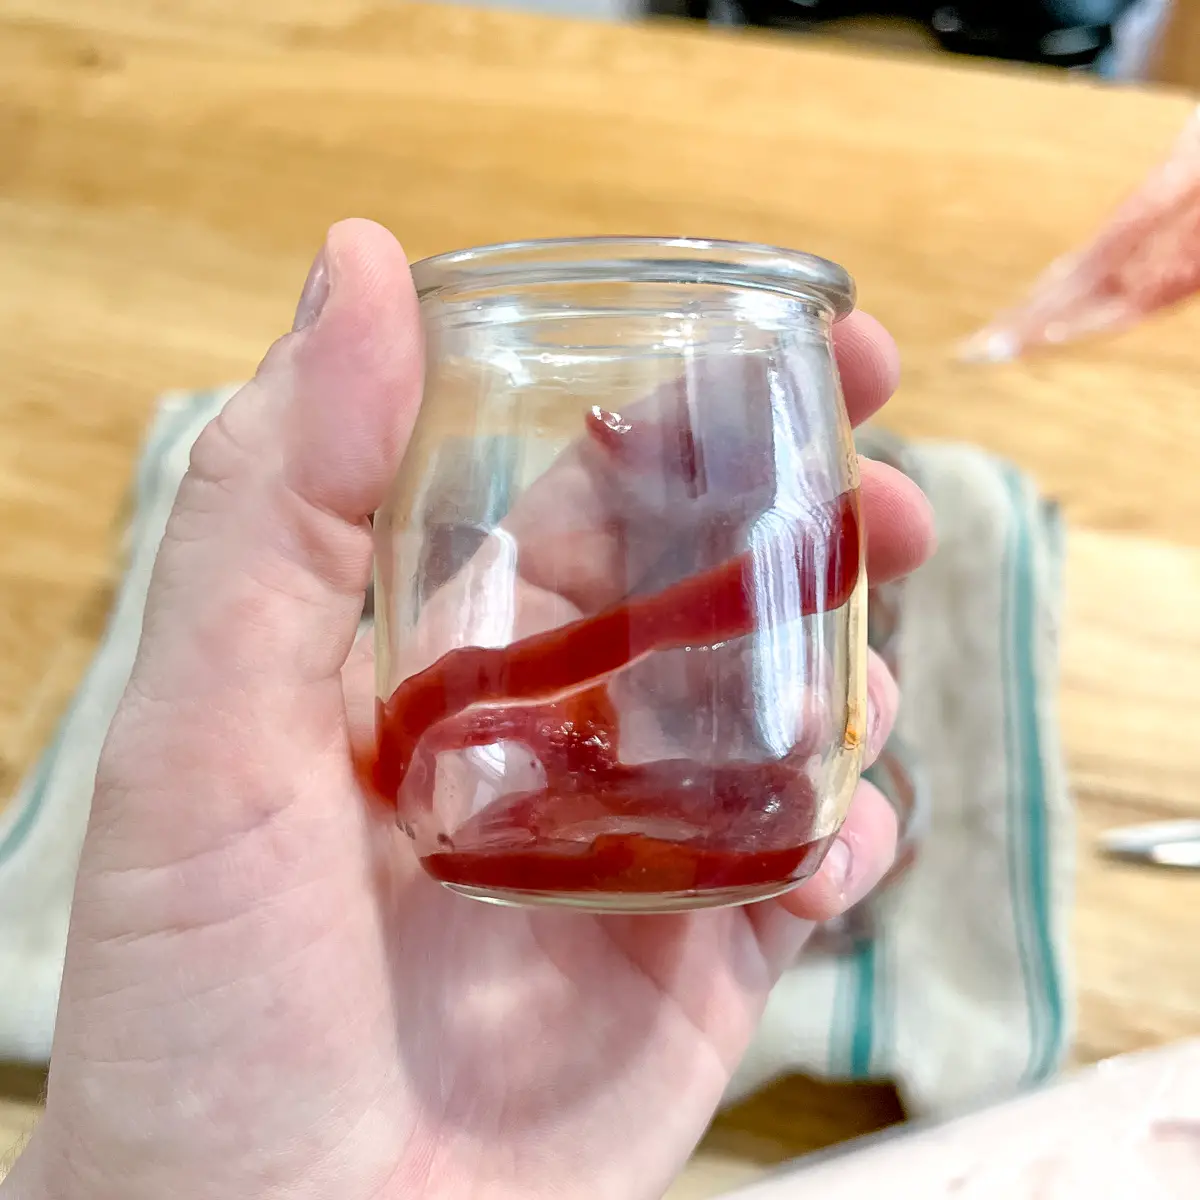 A small glass jar with strawberry sauce drizzle in it.